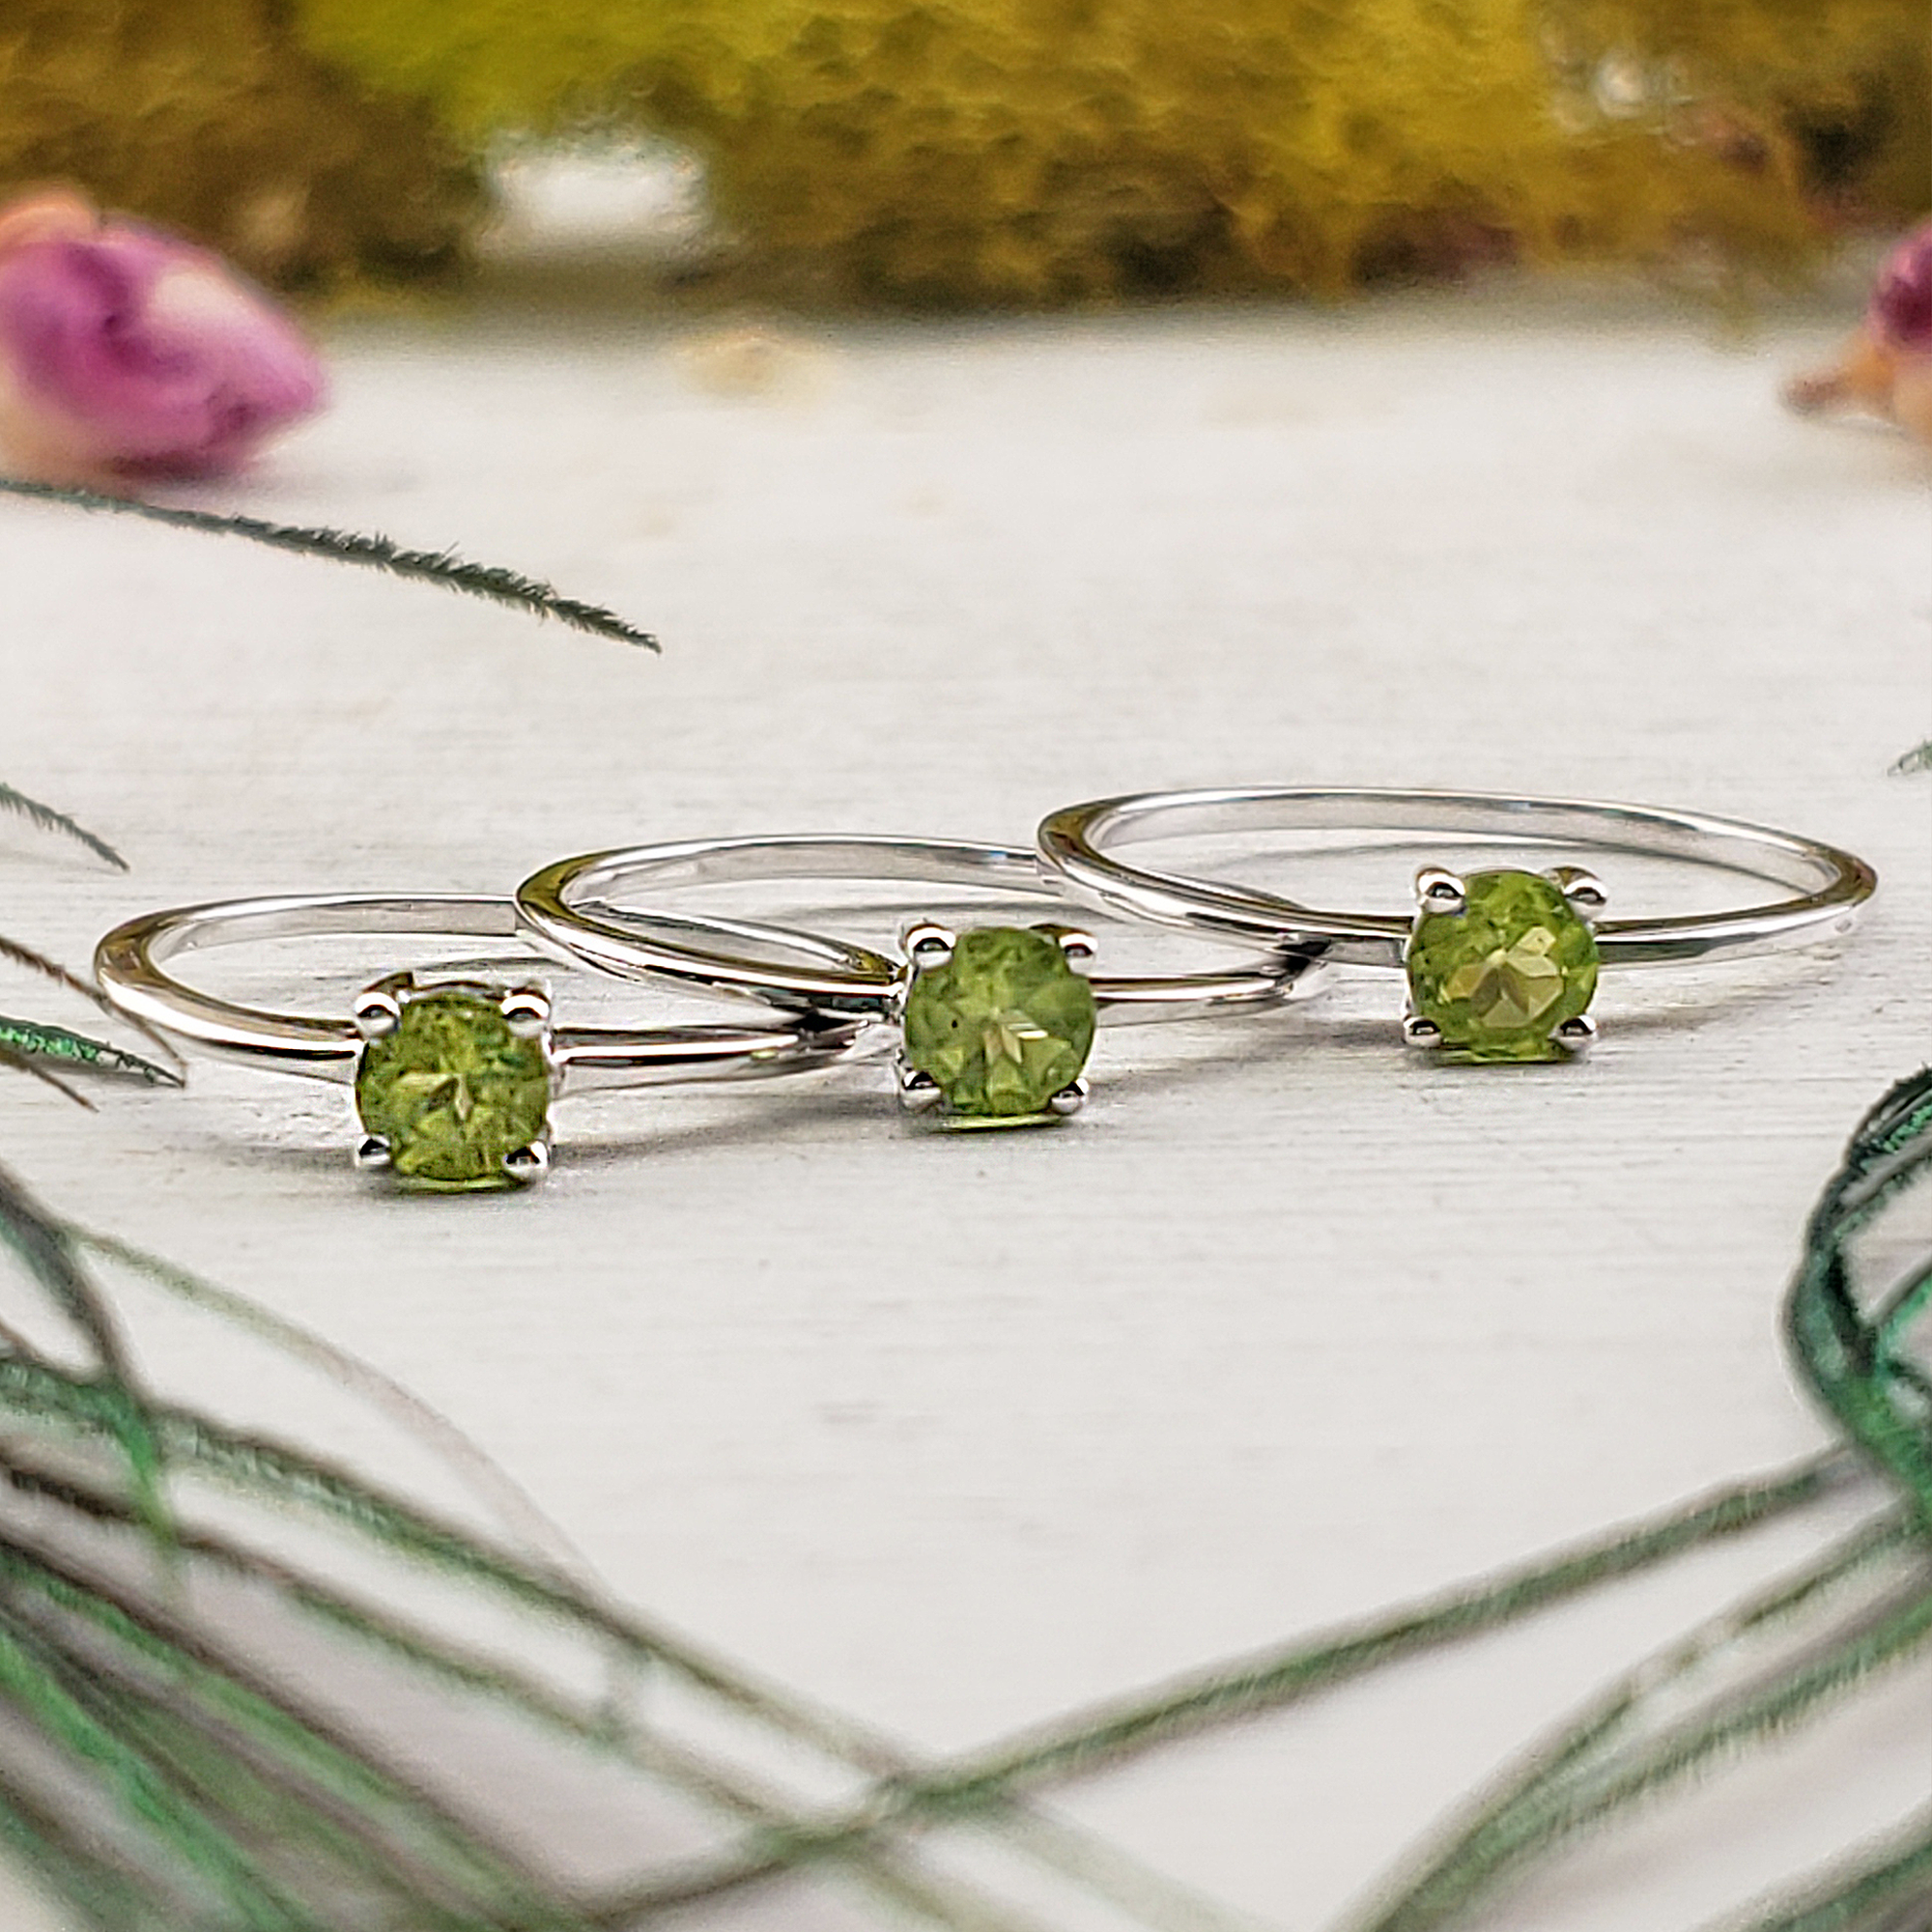 Peridot Stone Natural Crystal Sterling Silver Ring - Annabelle - Multiple Peridot Rings Together